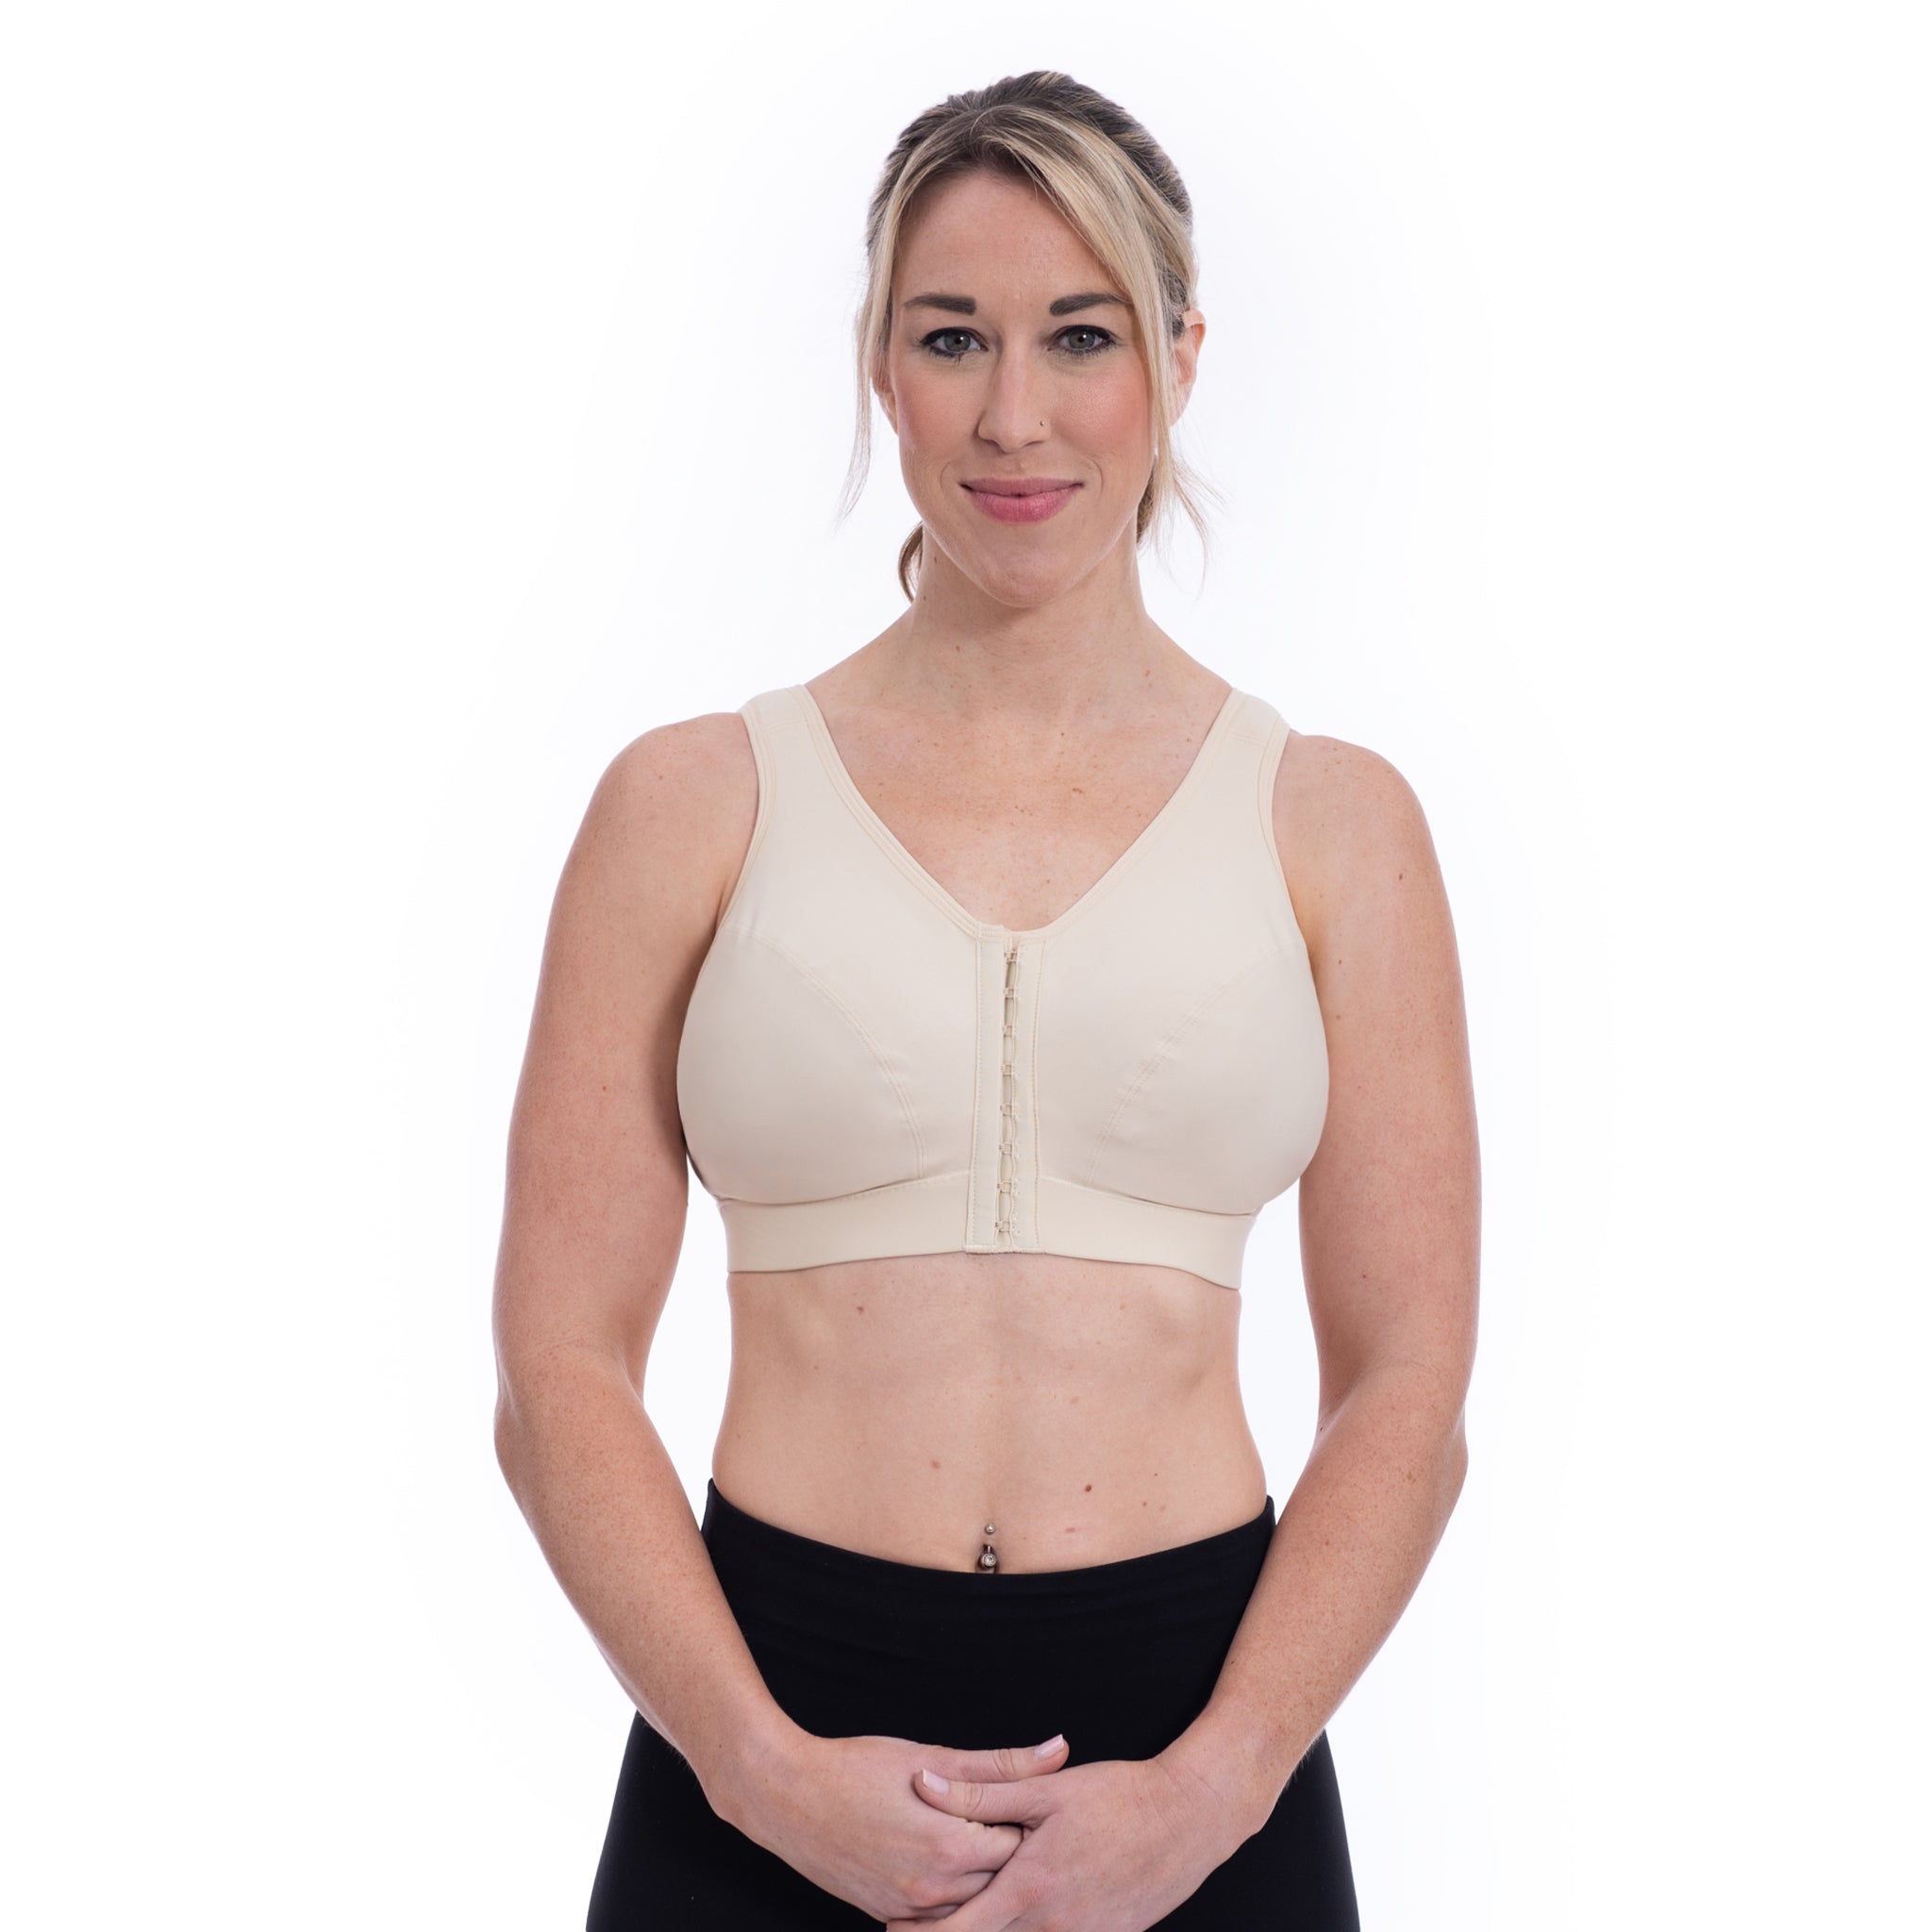 Enell Bra Features: Easy on and off 